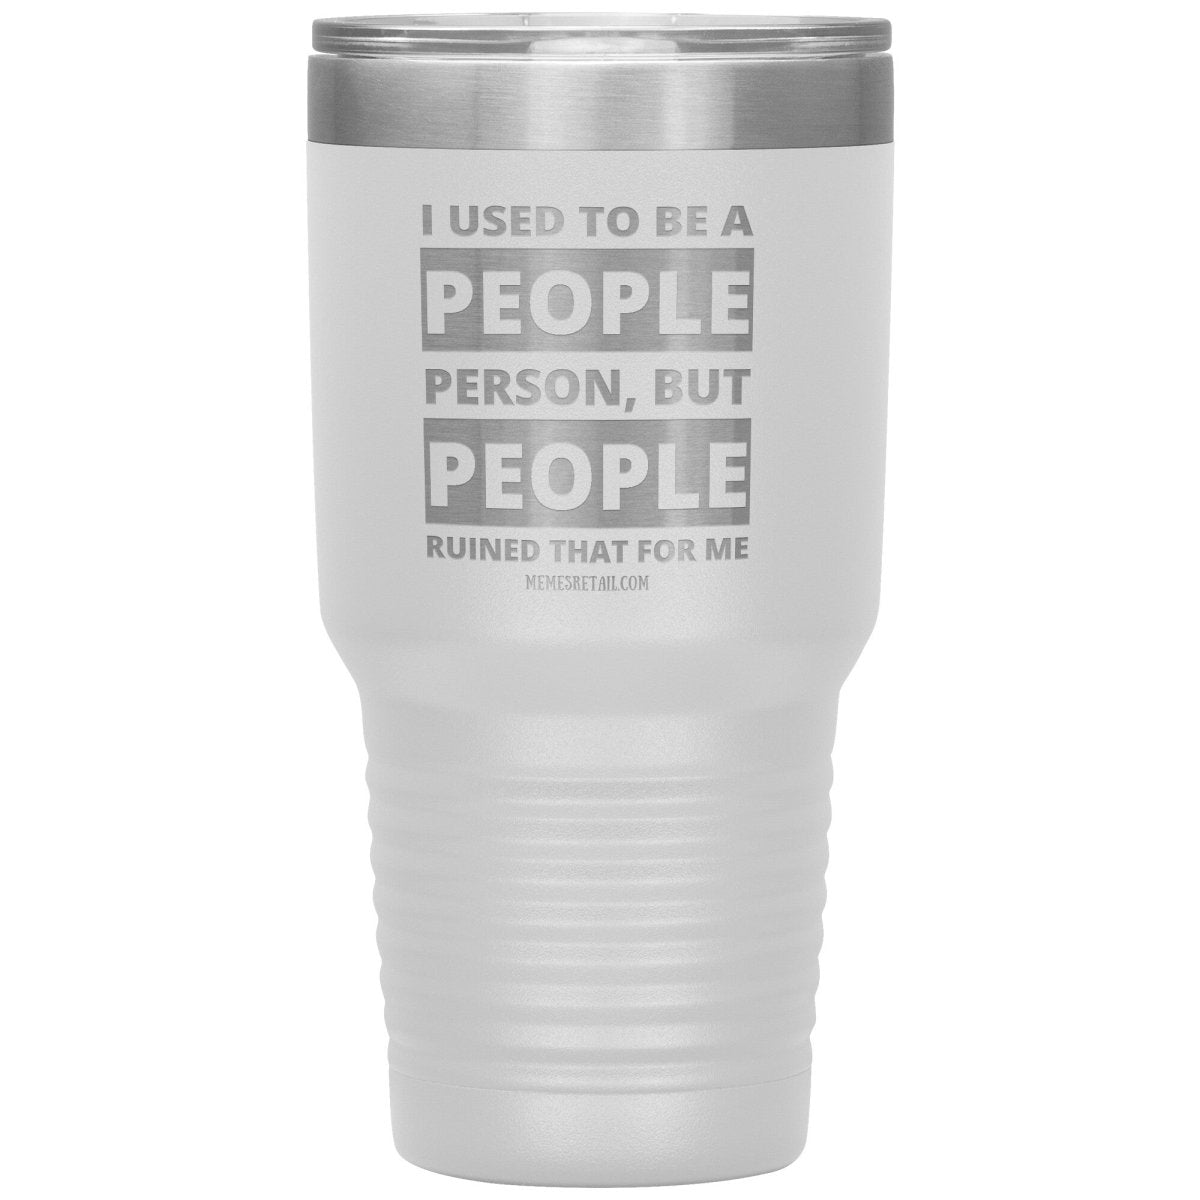 I Used To Be A People Person, But People Ruined That For Me Tumblers, 30oz Insulated Tumbler / White - MemesRetail.com